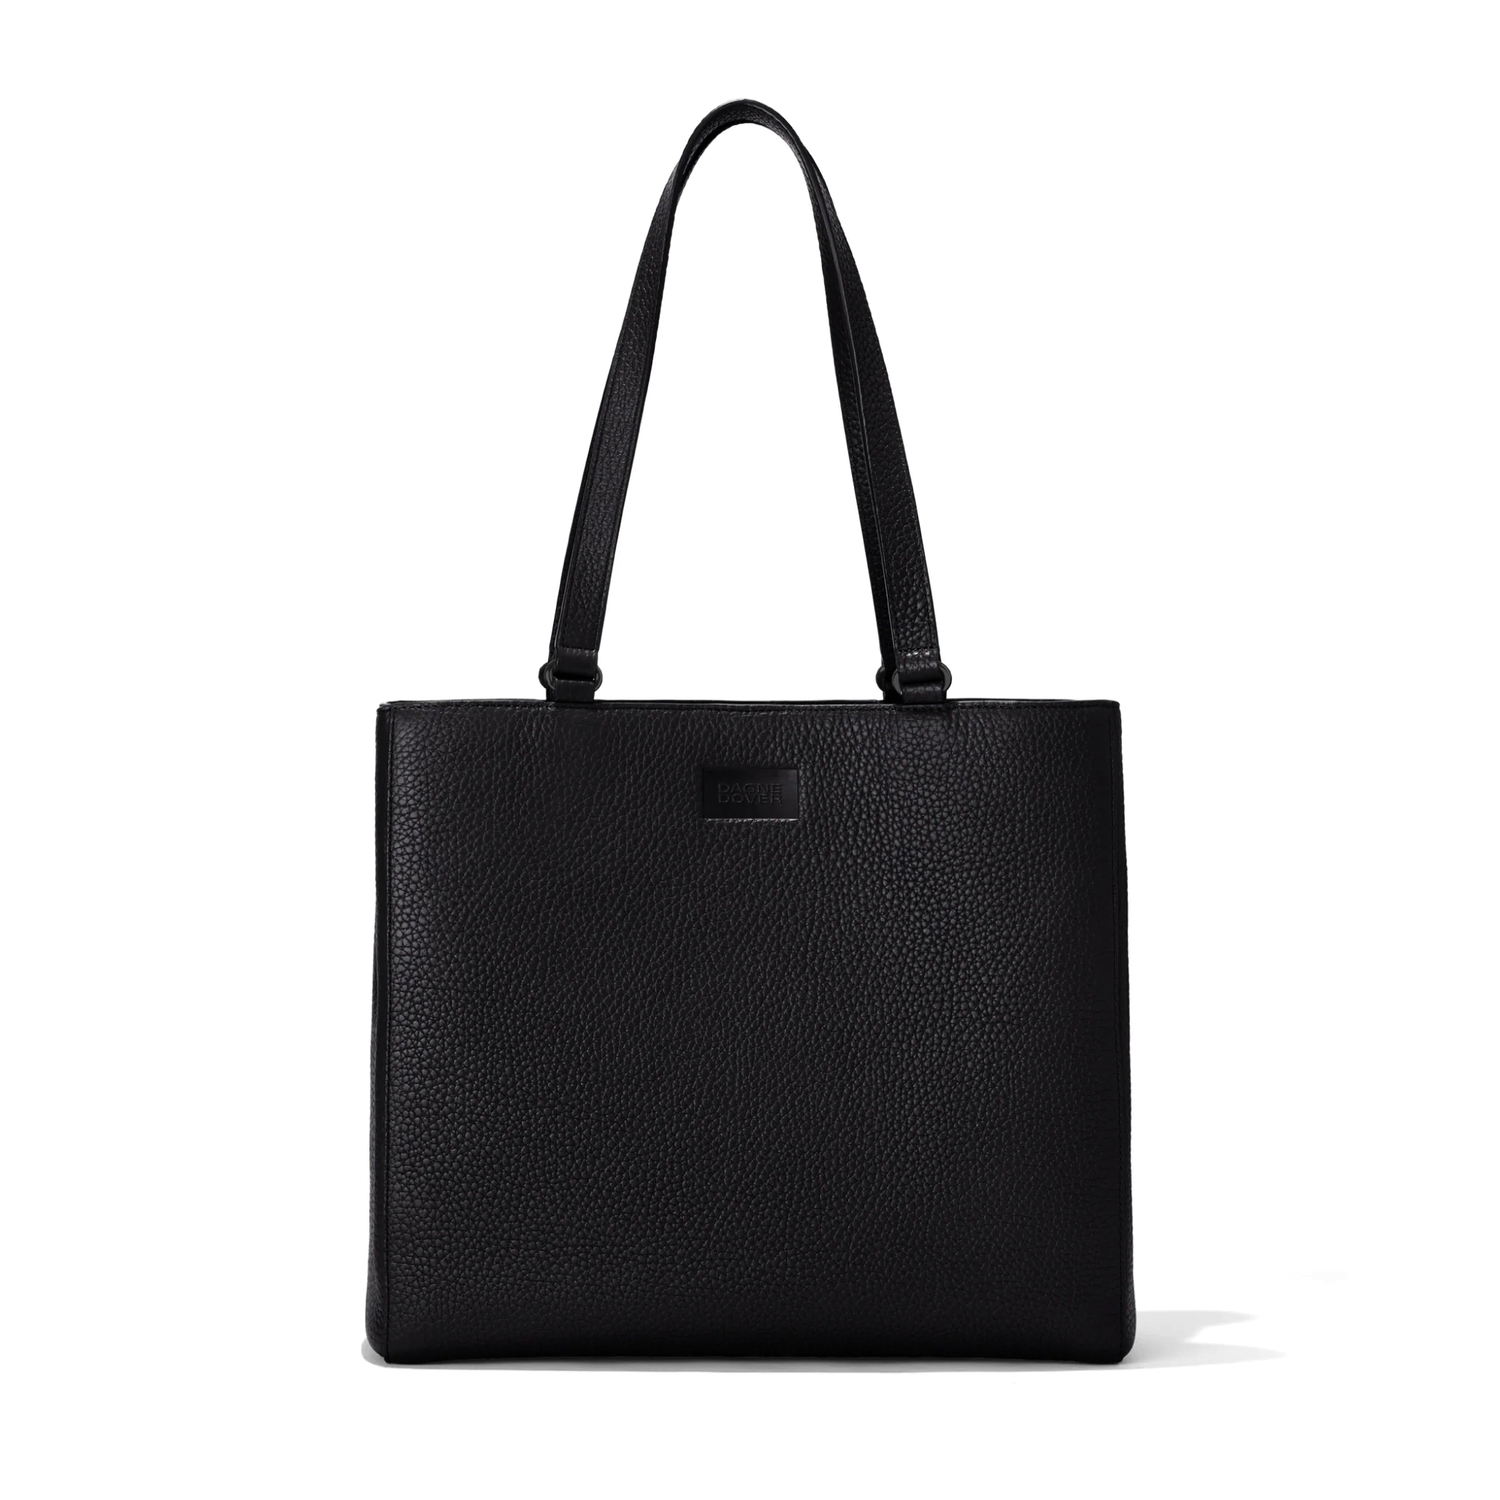 Black Leather-Look Handle Front Tote Bag